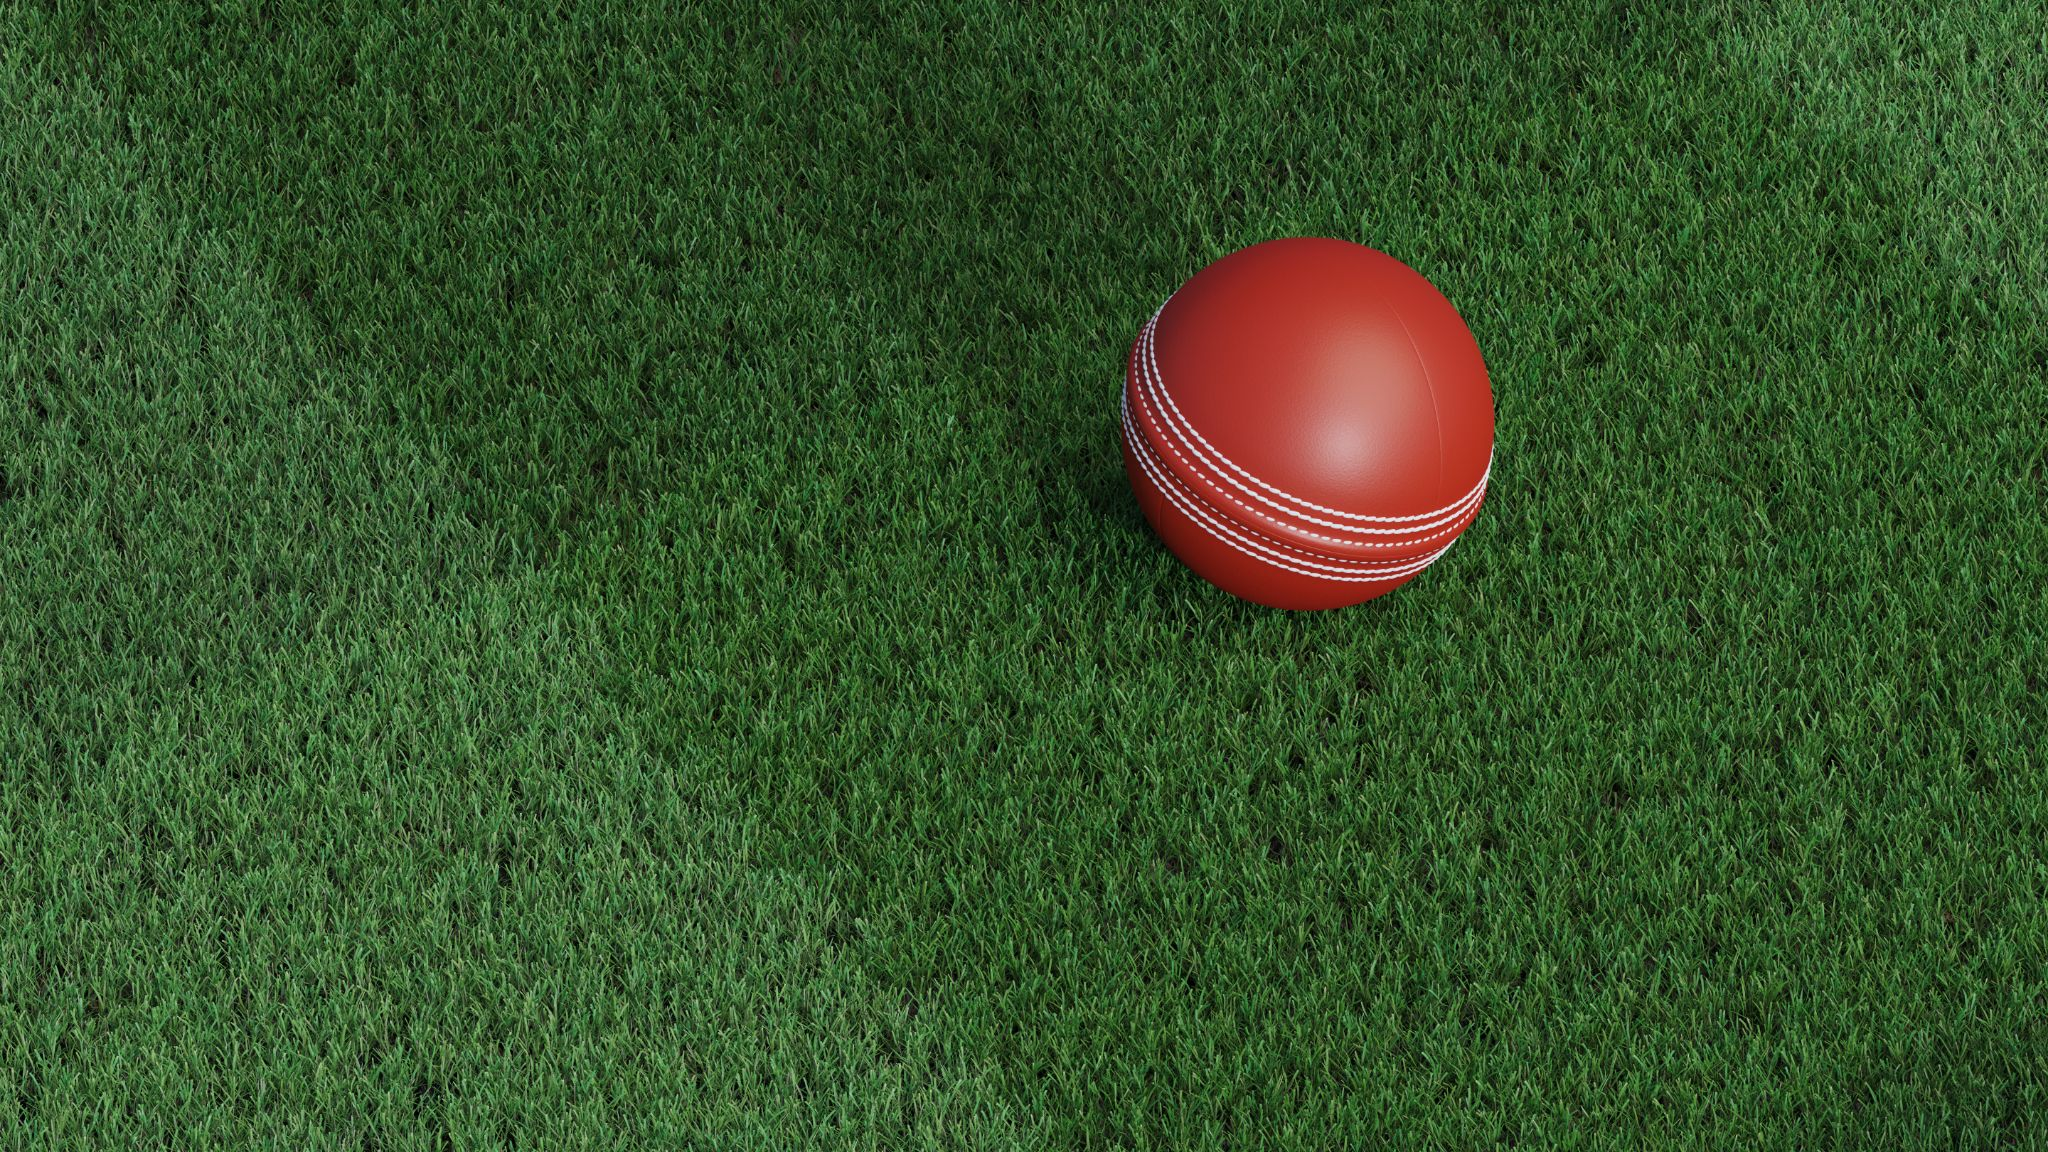 A cricket ball on the ground